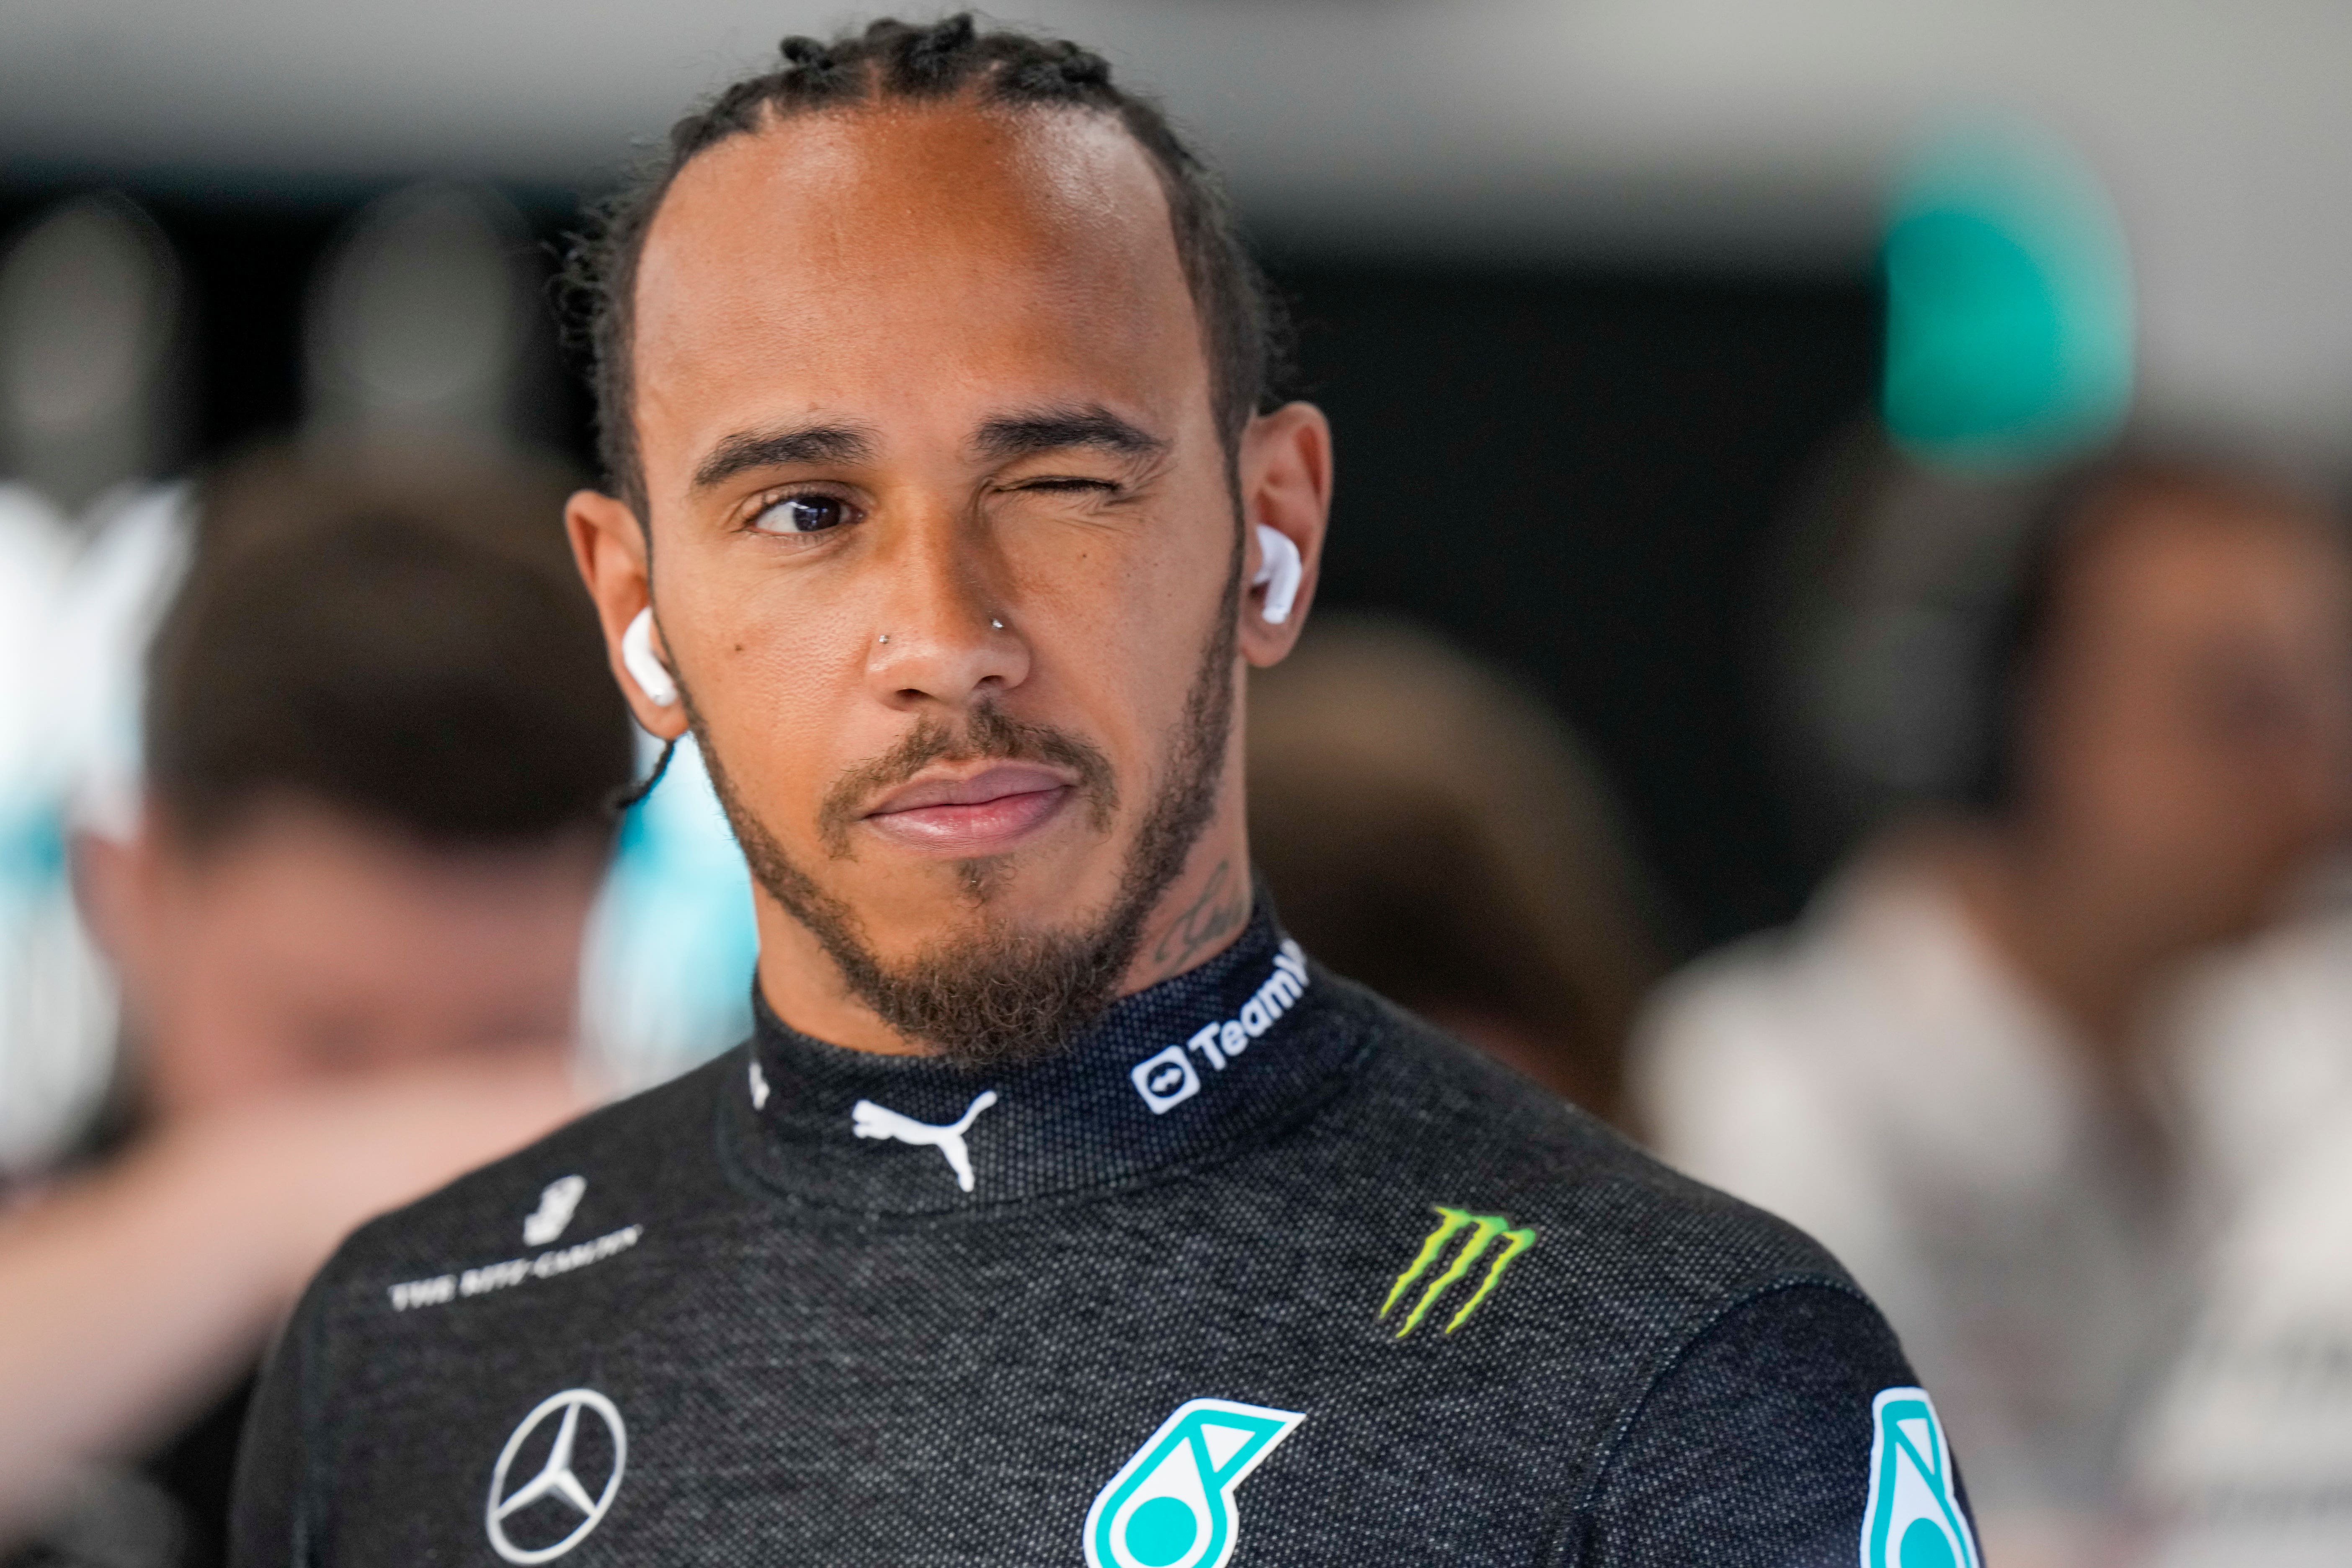 Lewis Hamilton finished fifth in Jeddah